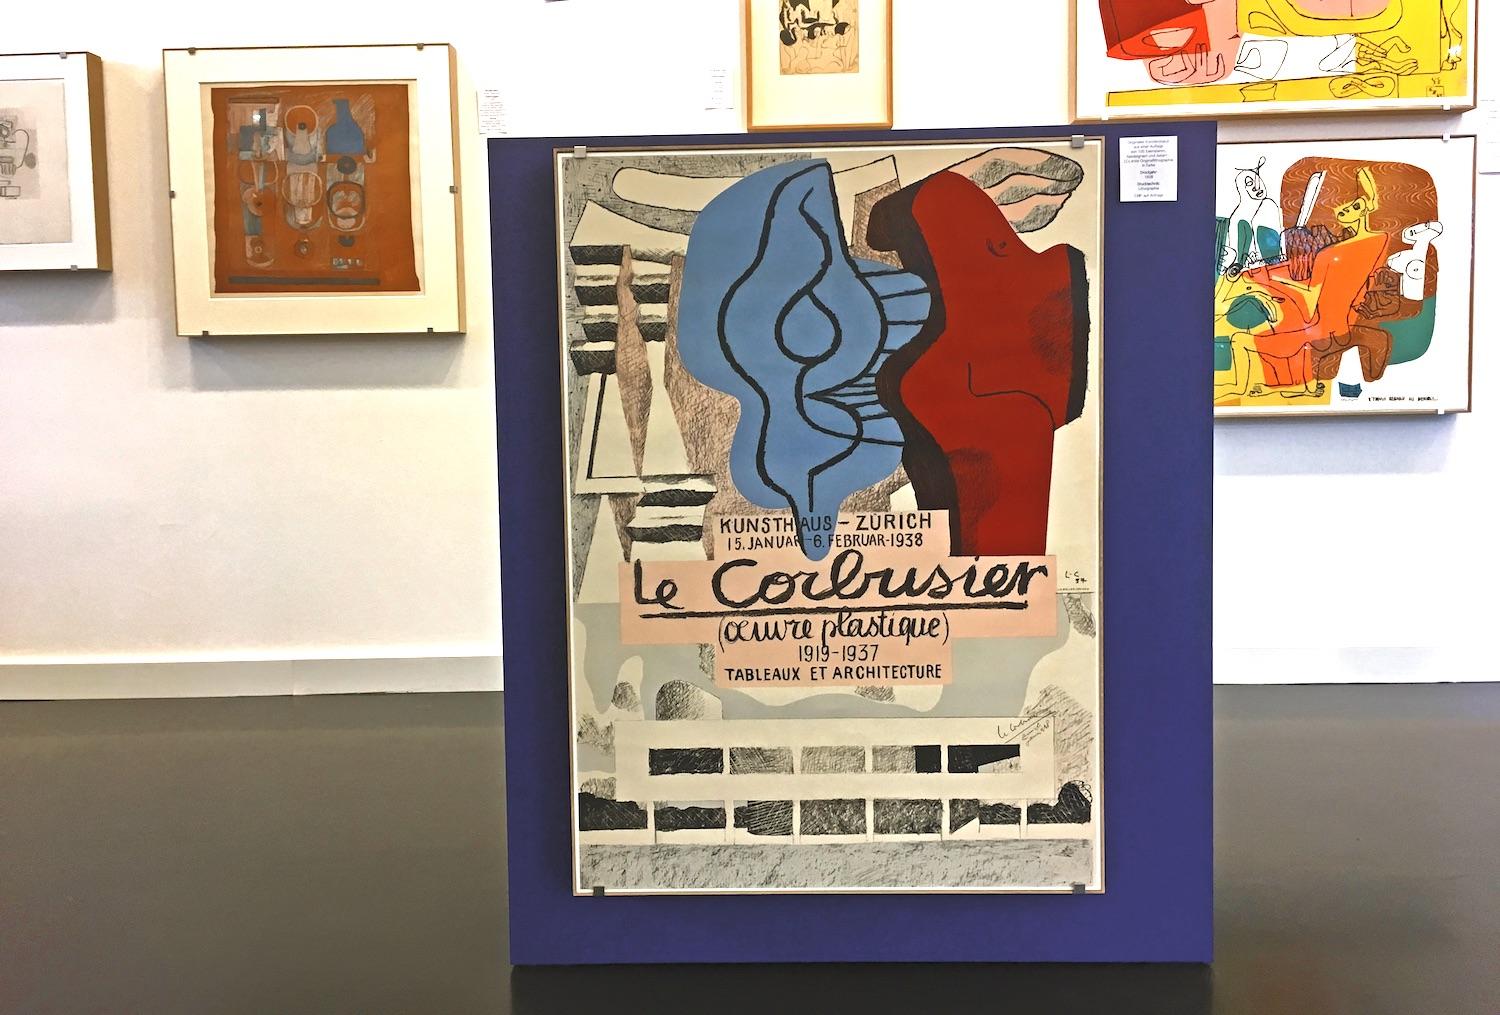 Œuvre Plastique,  Kunsthaus Zürich 1938 – lithograph, hand-signed and denoted - Modern Print by Le Corbusier